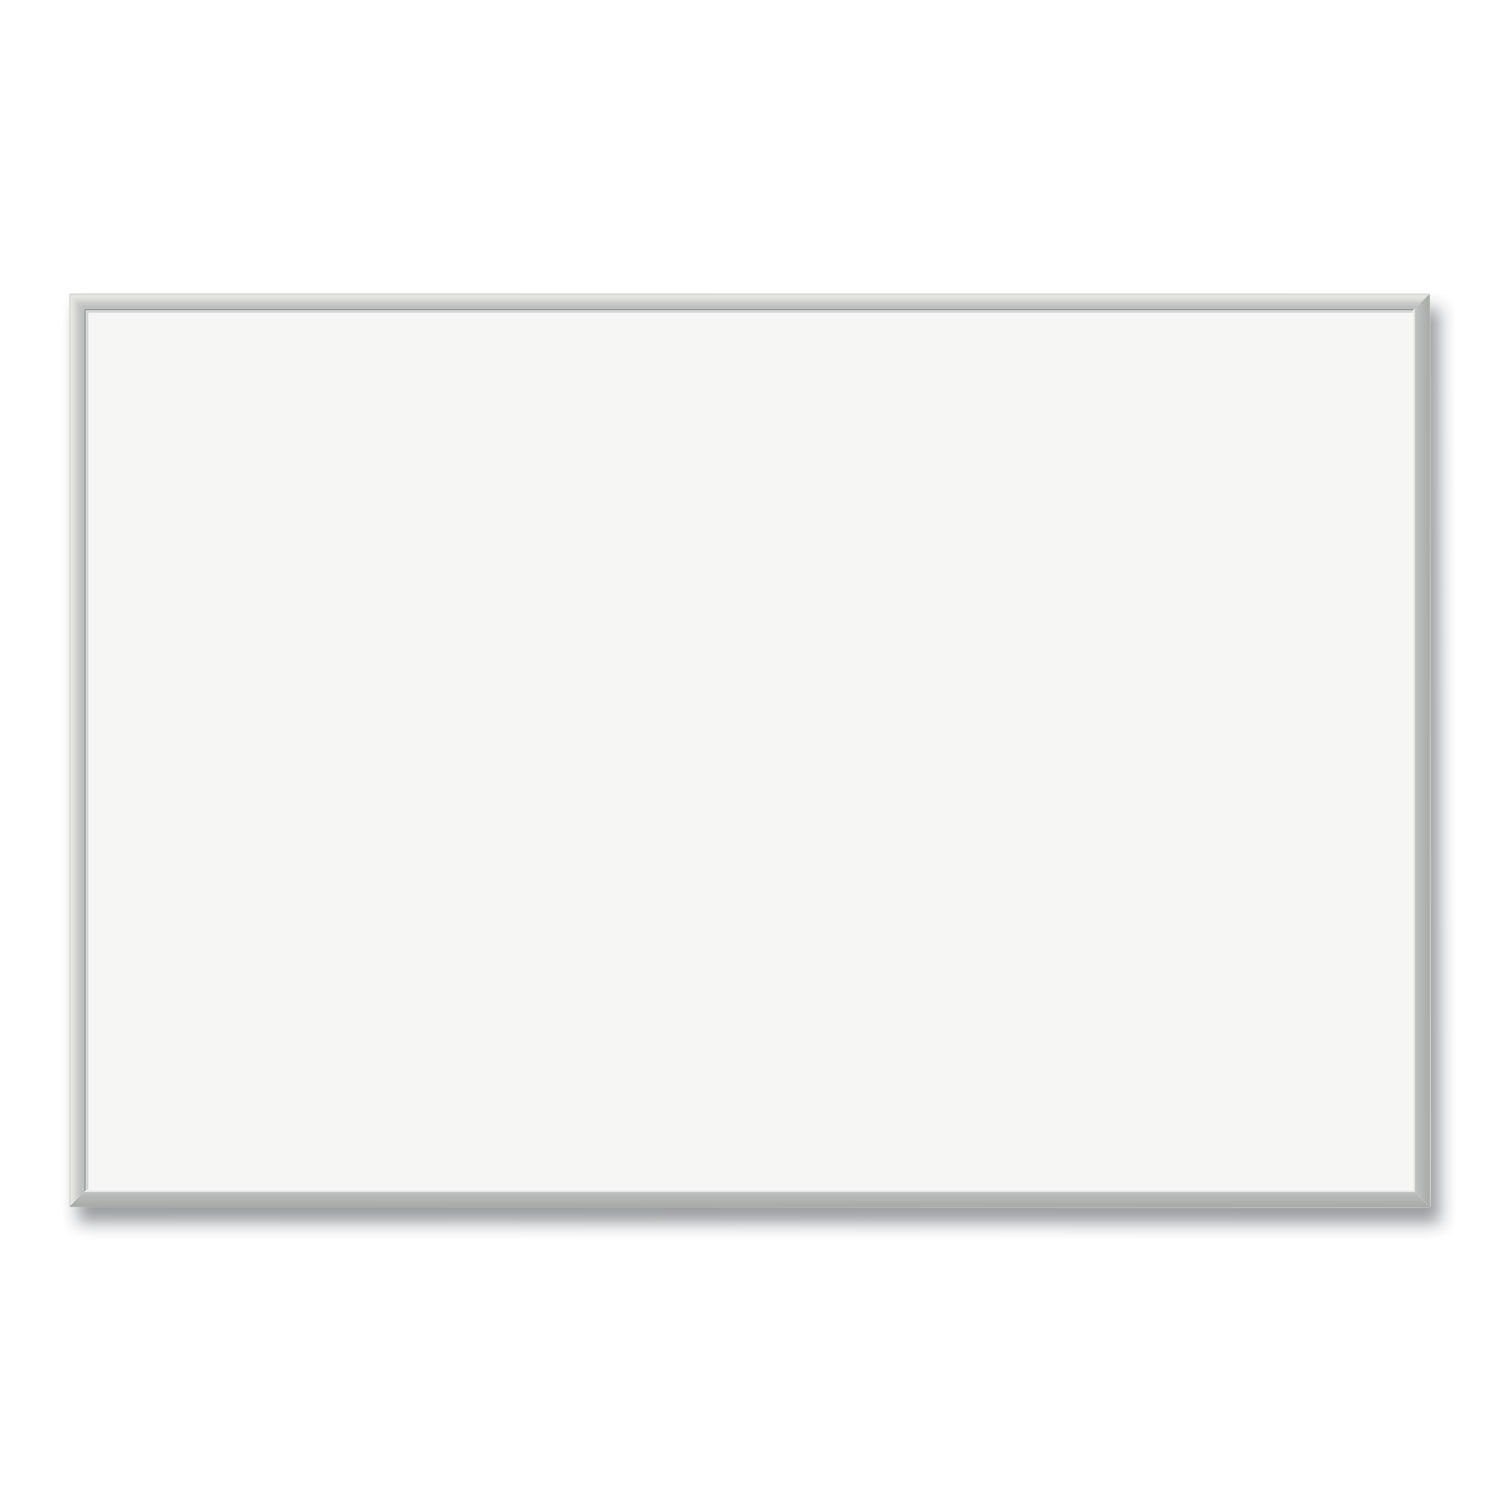 Magnetic Dry Erase Board with Aluminum Frame 70 x 47, White Surface, Silver Frame